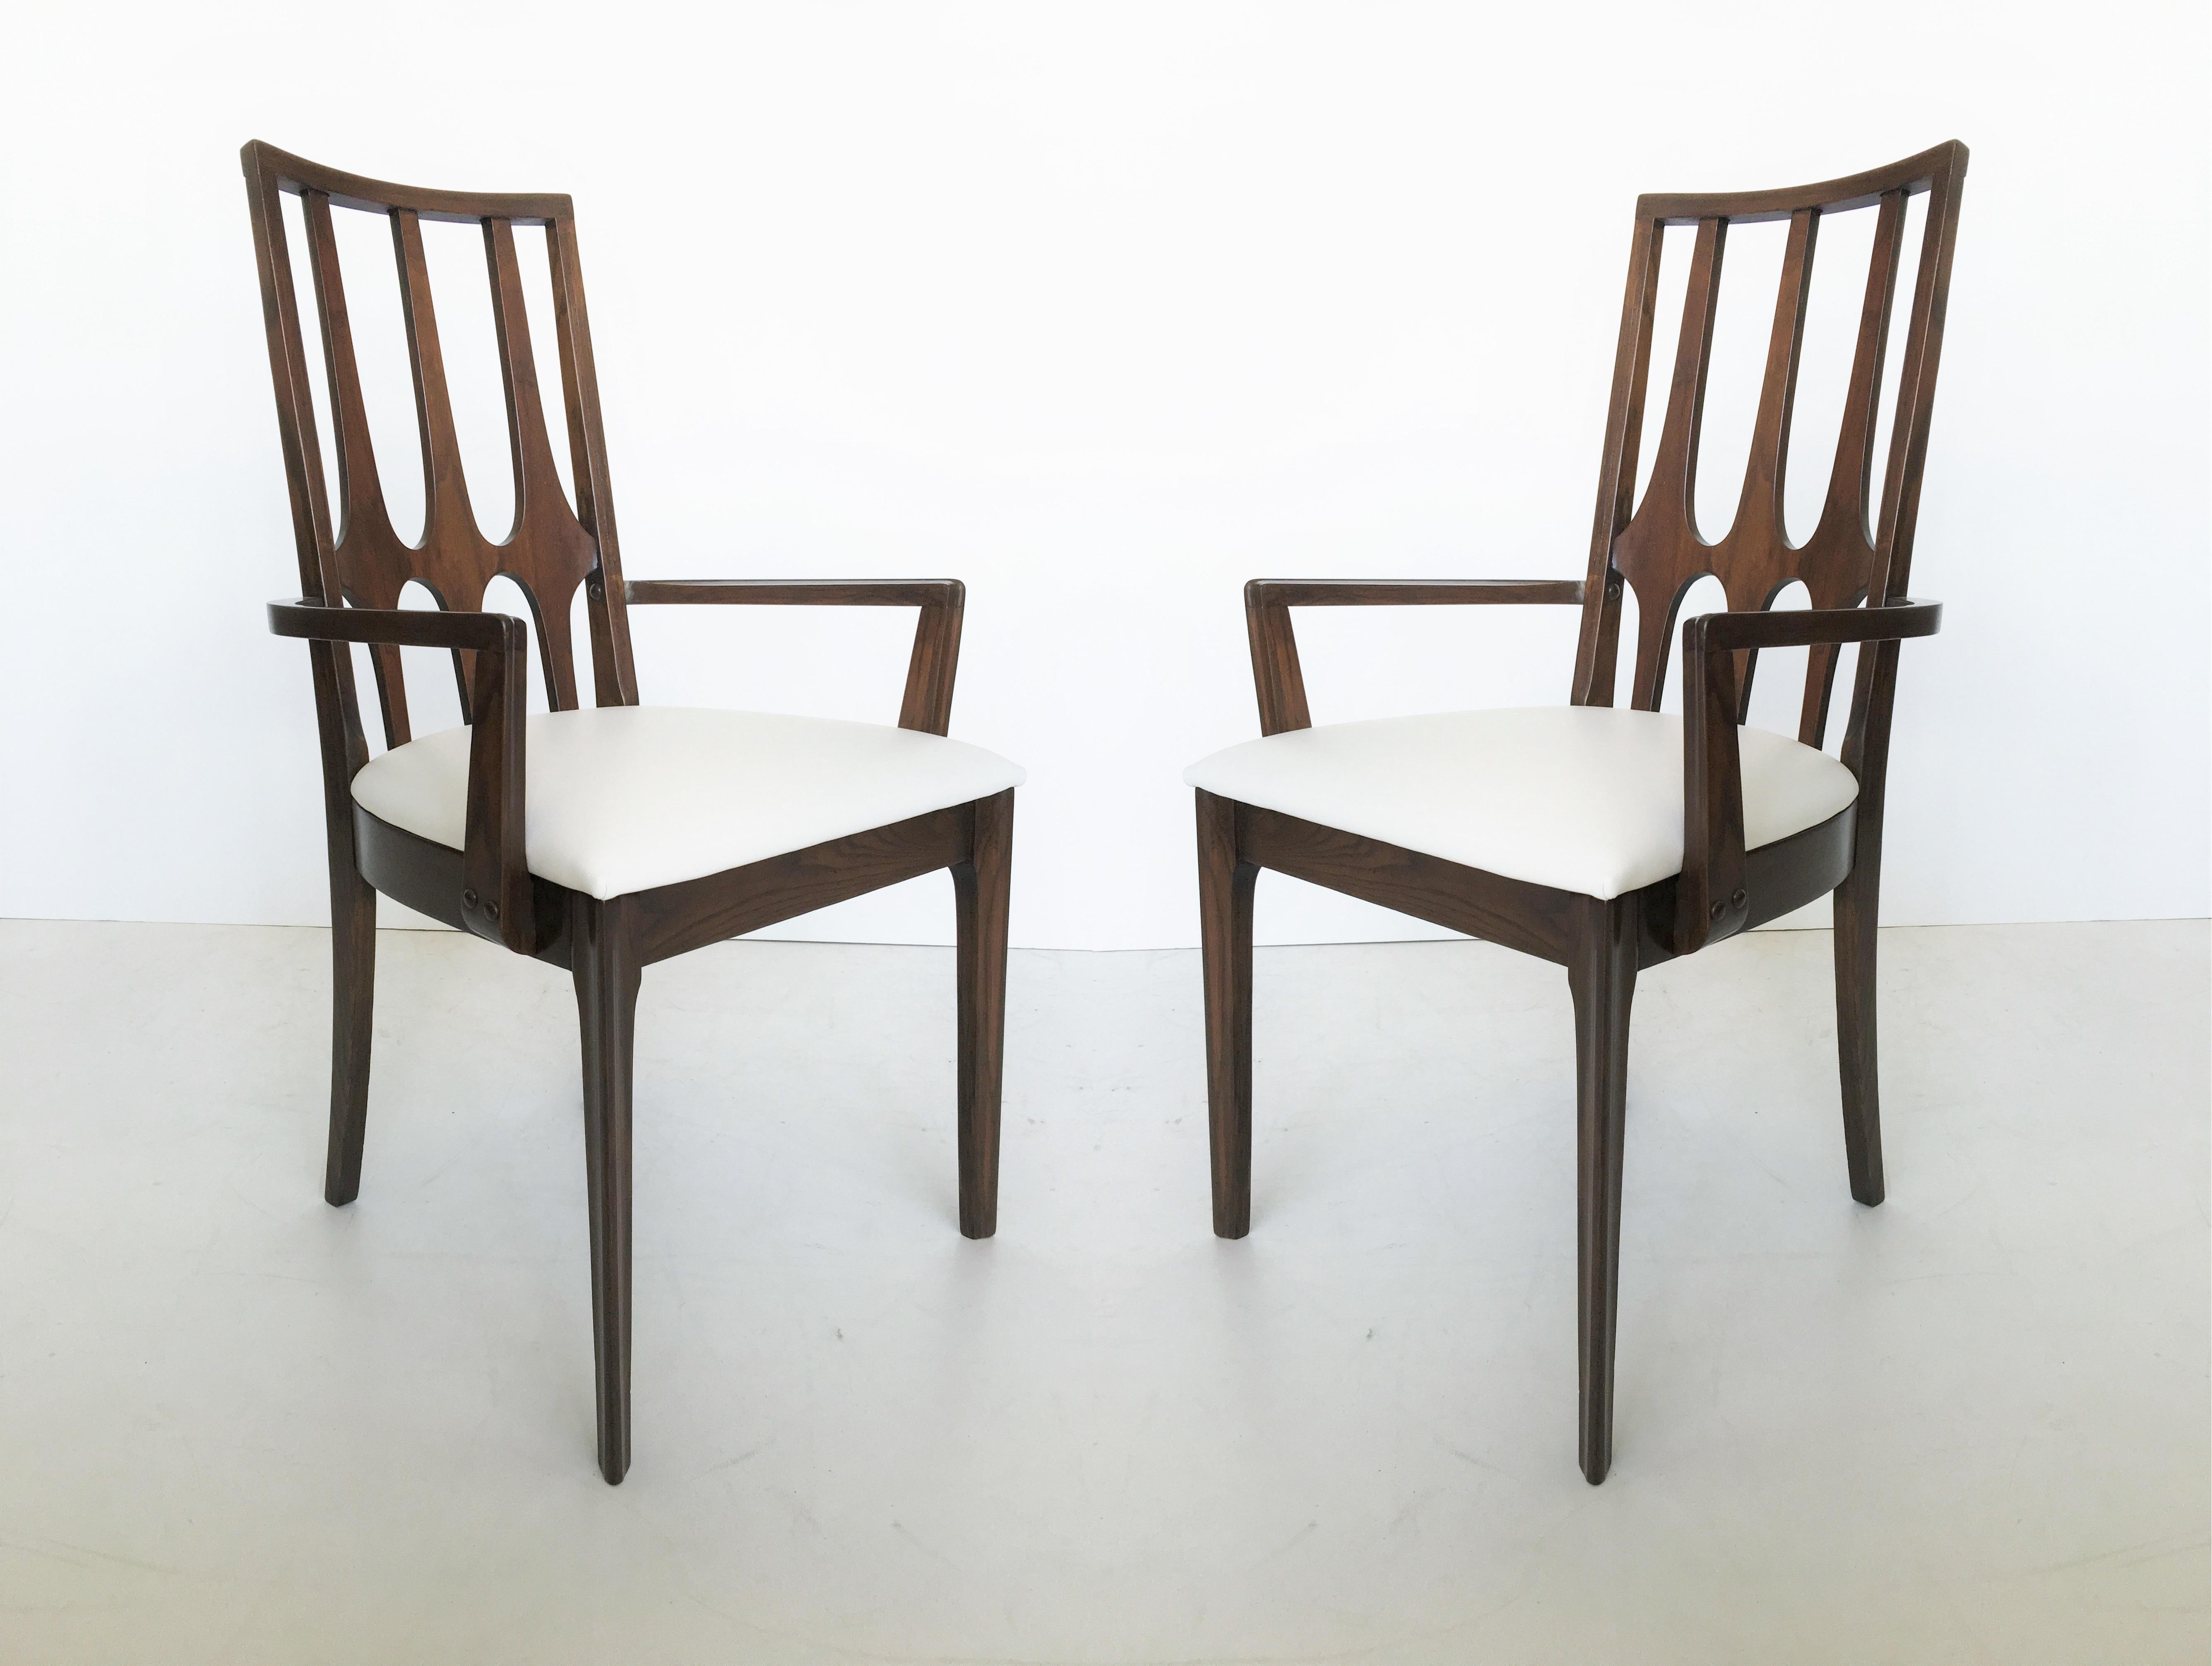 Set of 10 vintage walnut dining chairs manufactured by Broyhill for the Brasilia collection, circa early 1960s. The chairs feature Oscar Niemeyer’s sculptural curved backs. The ten chairs consist of 8 armless chairs and 2 armchairs with straight